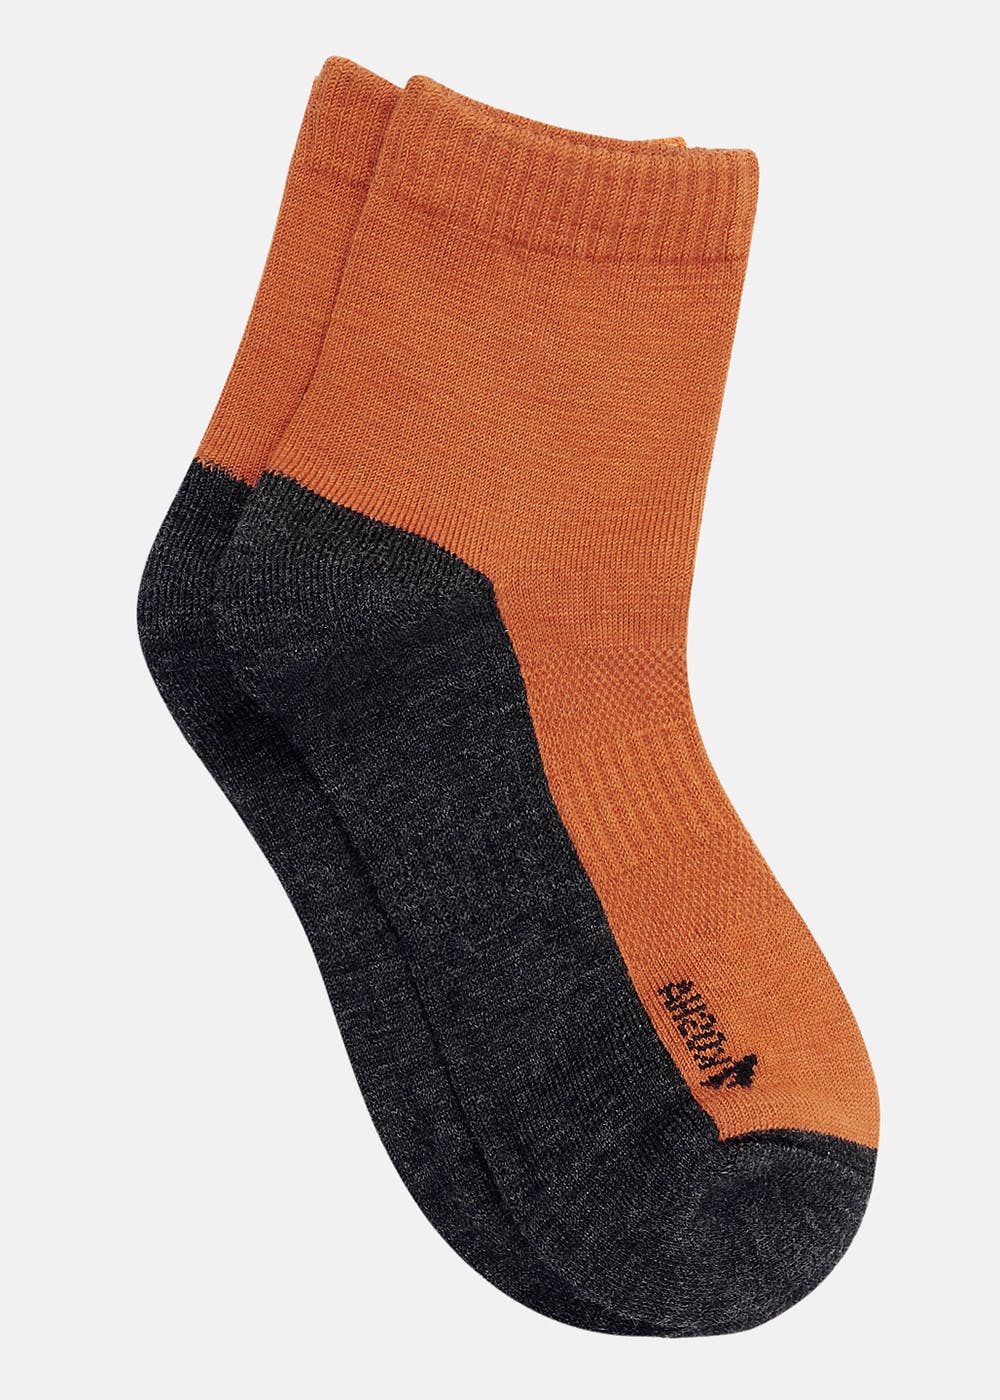 Get Two-Tone Knitted Socks at ₹ 690 | LBB Shop